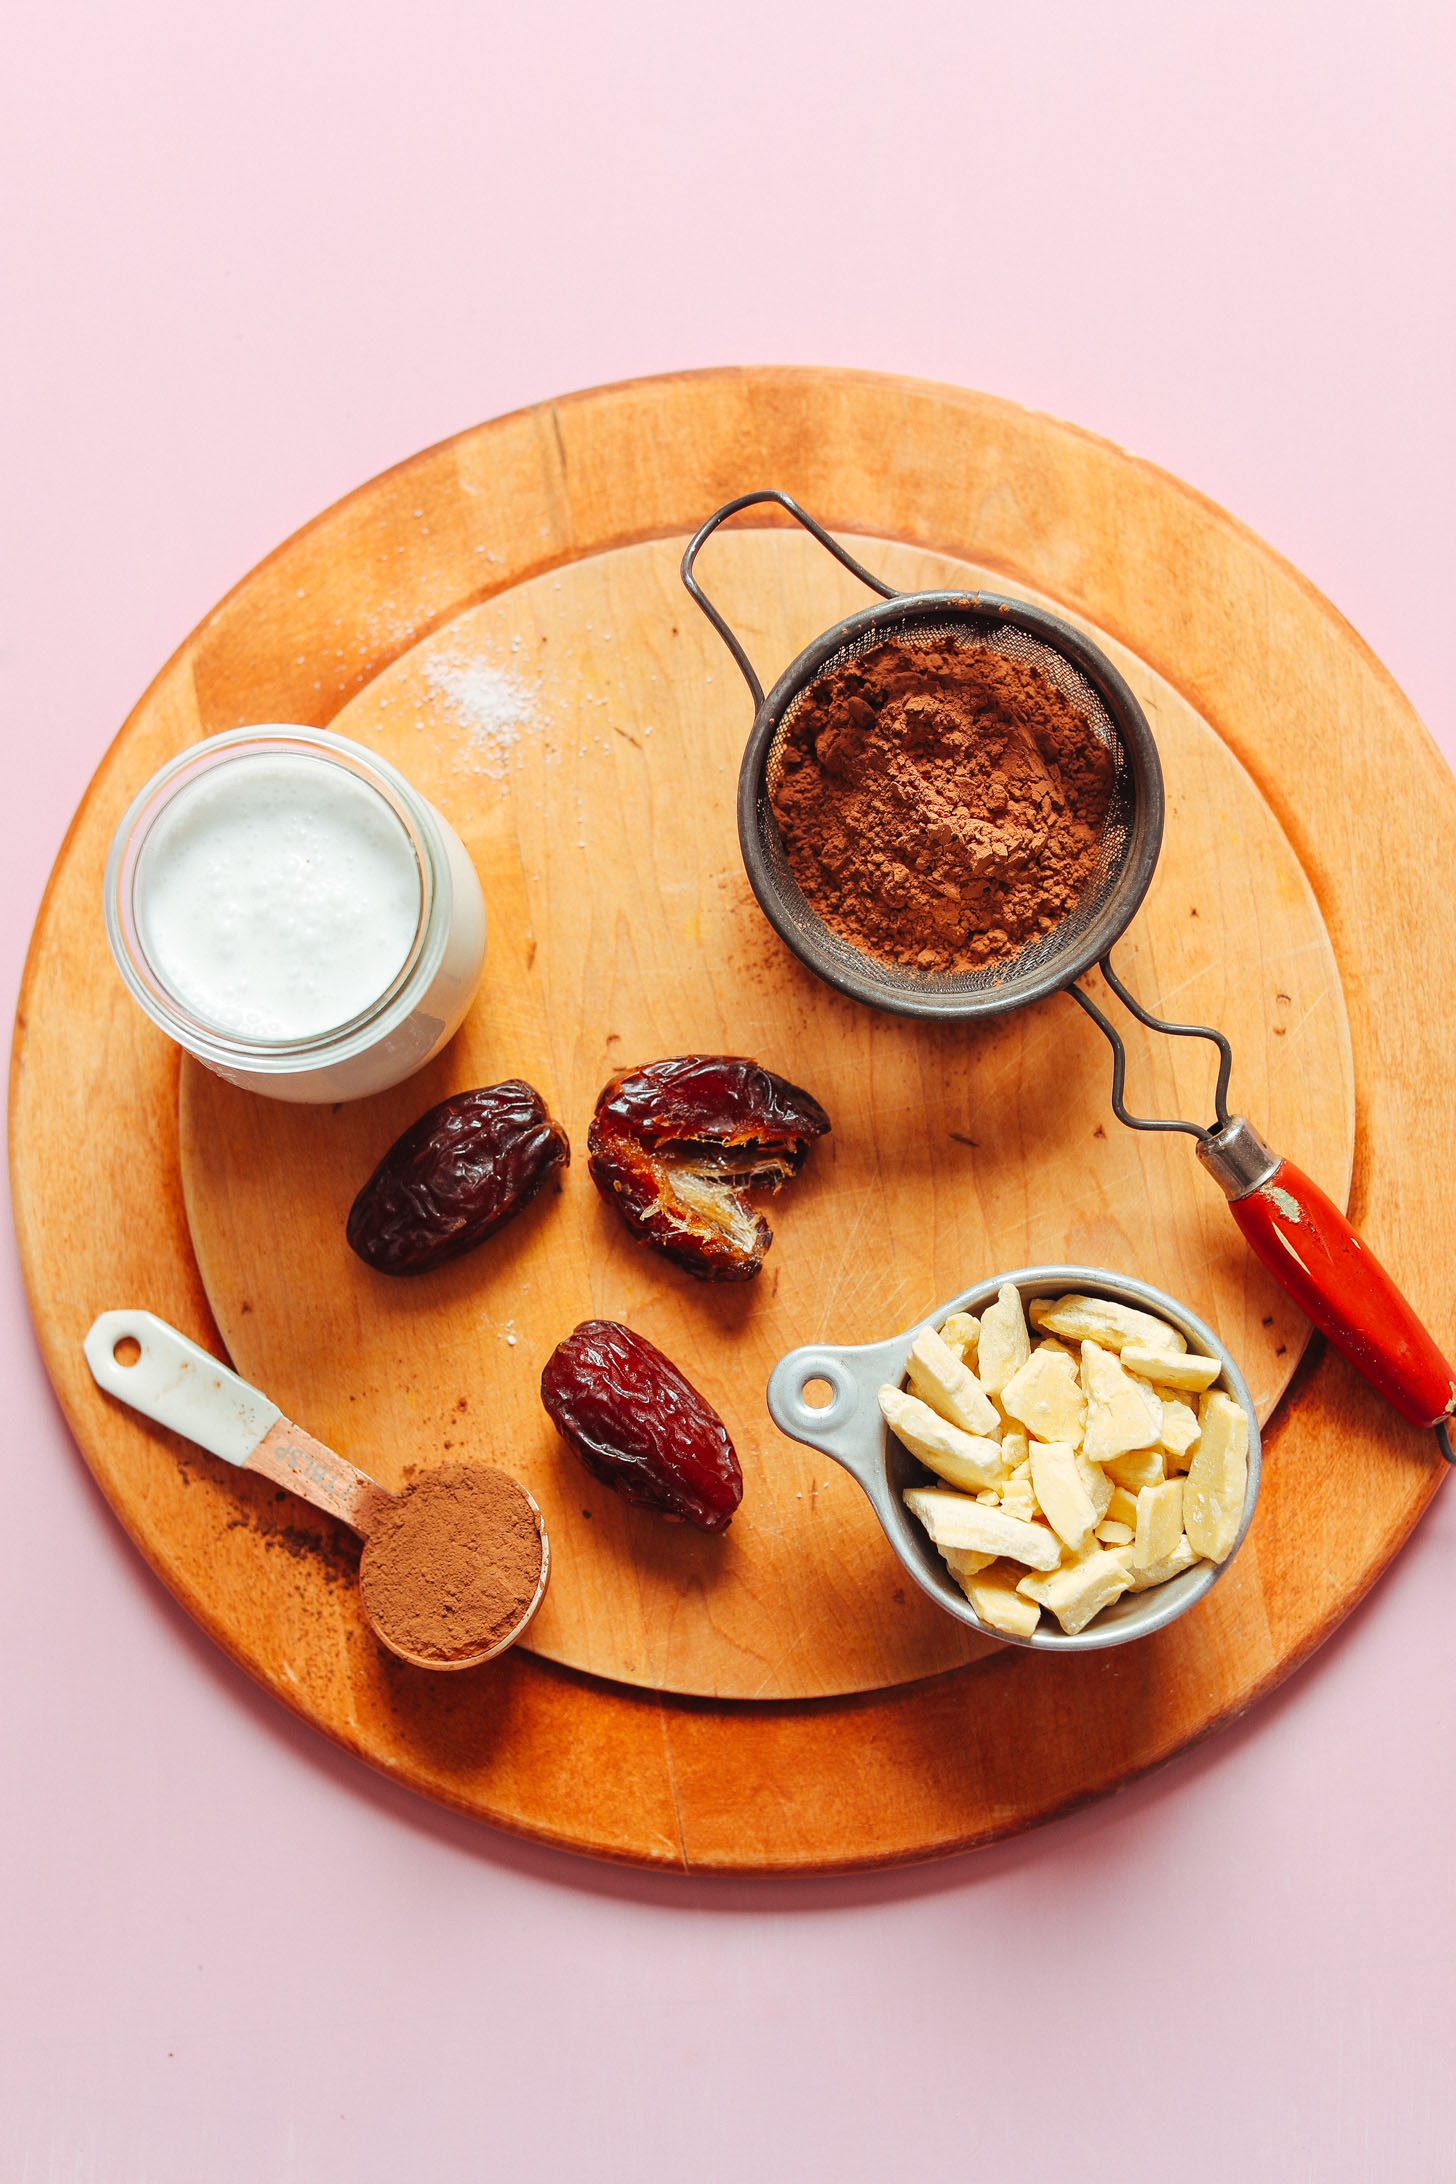 Cocoa powder, coconut milk, dates, and cocoa butter for making Naturally Sweetened Vegan Chocolate Mousse